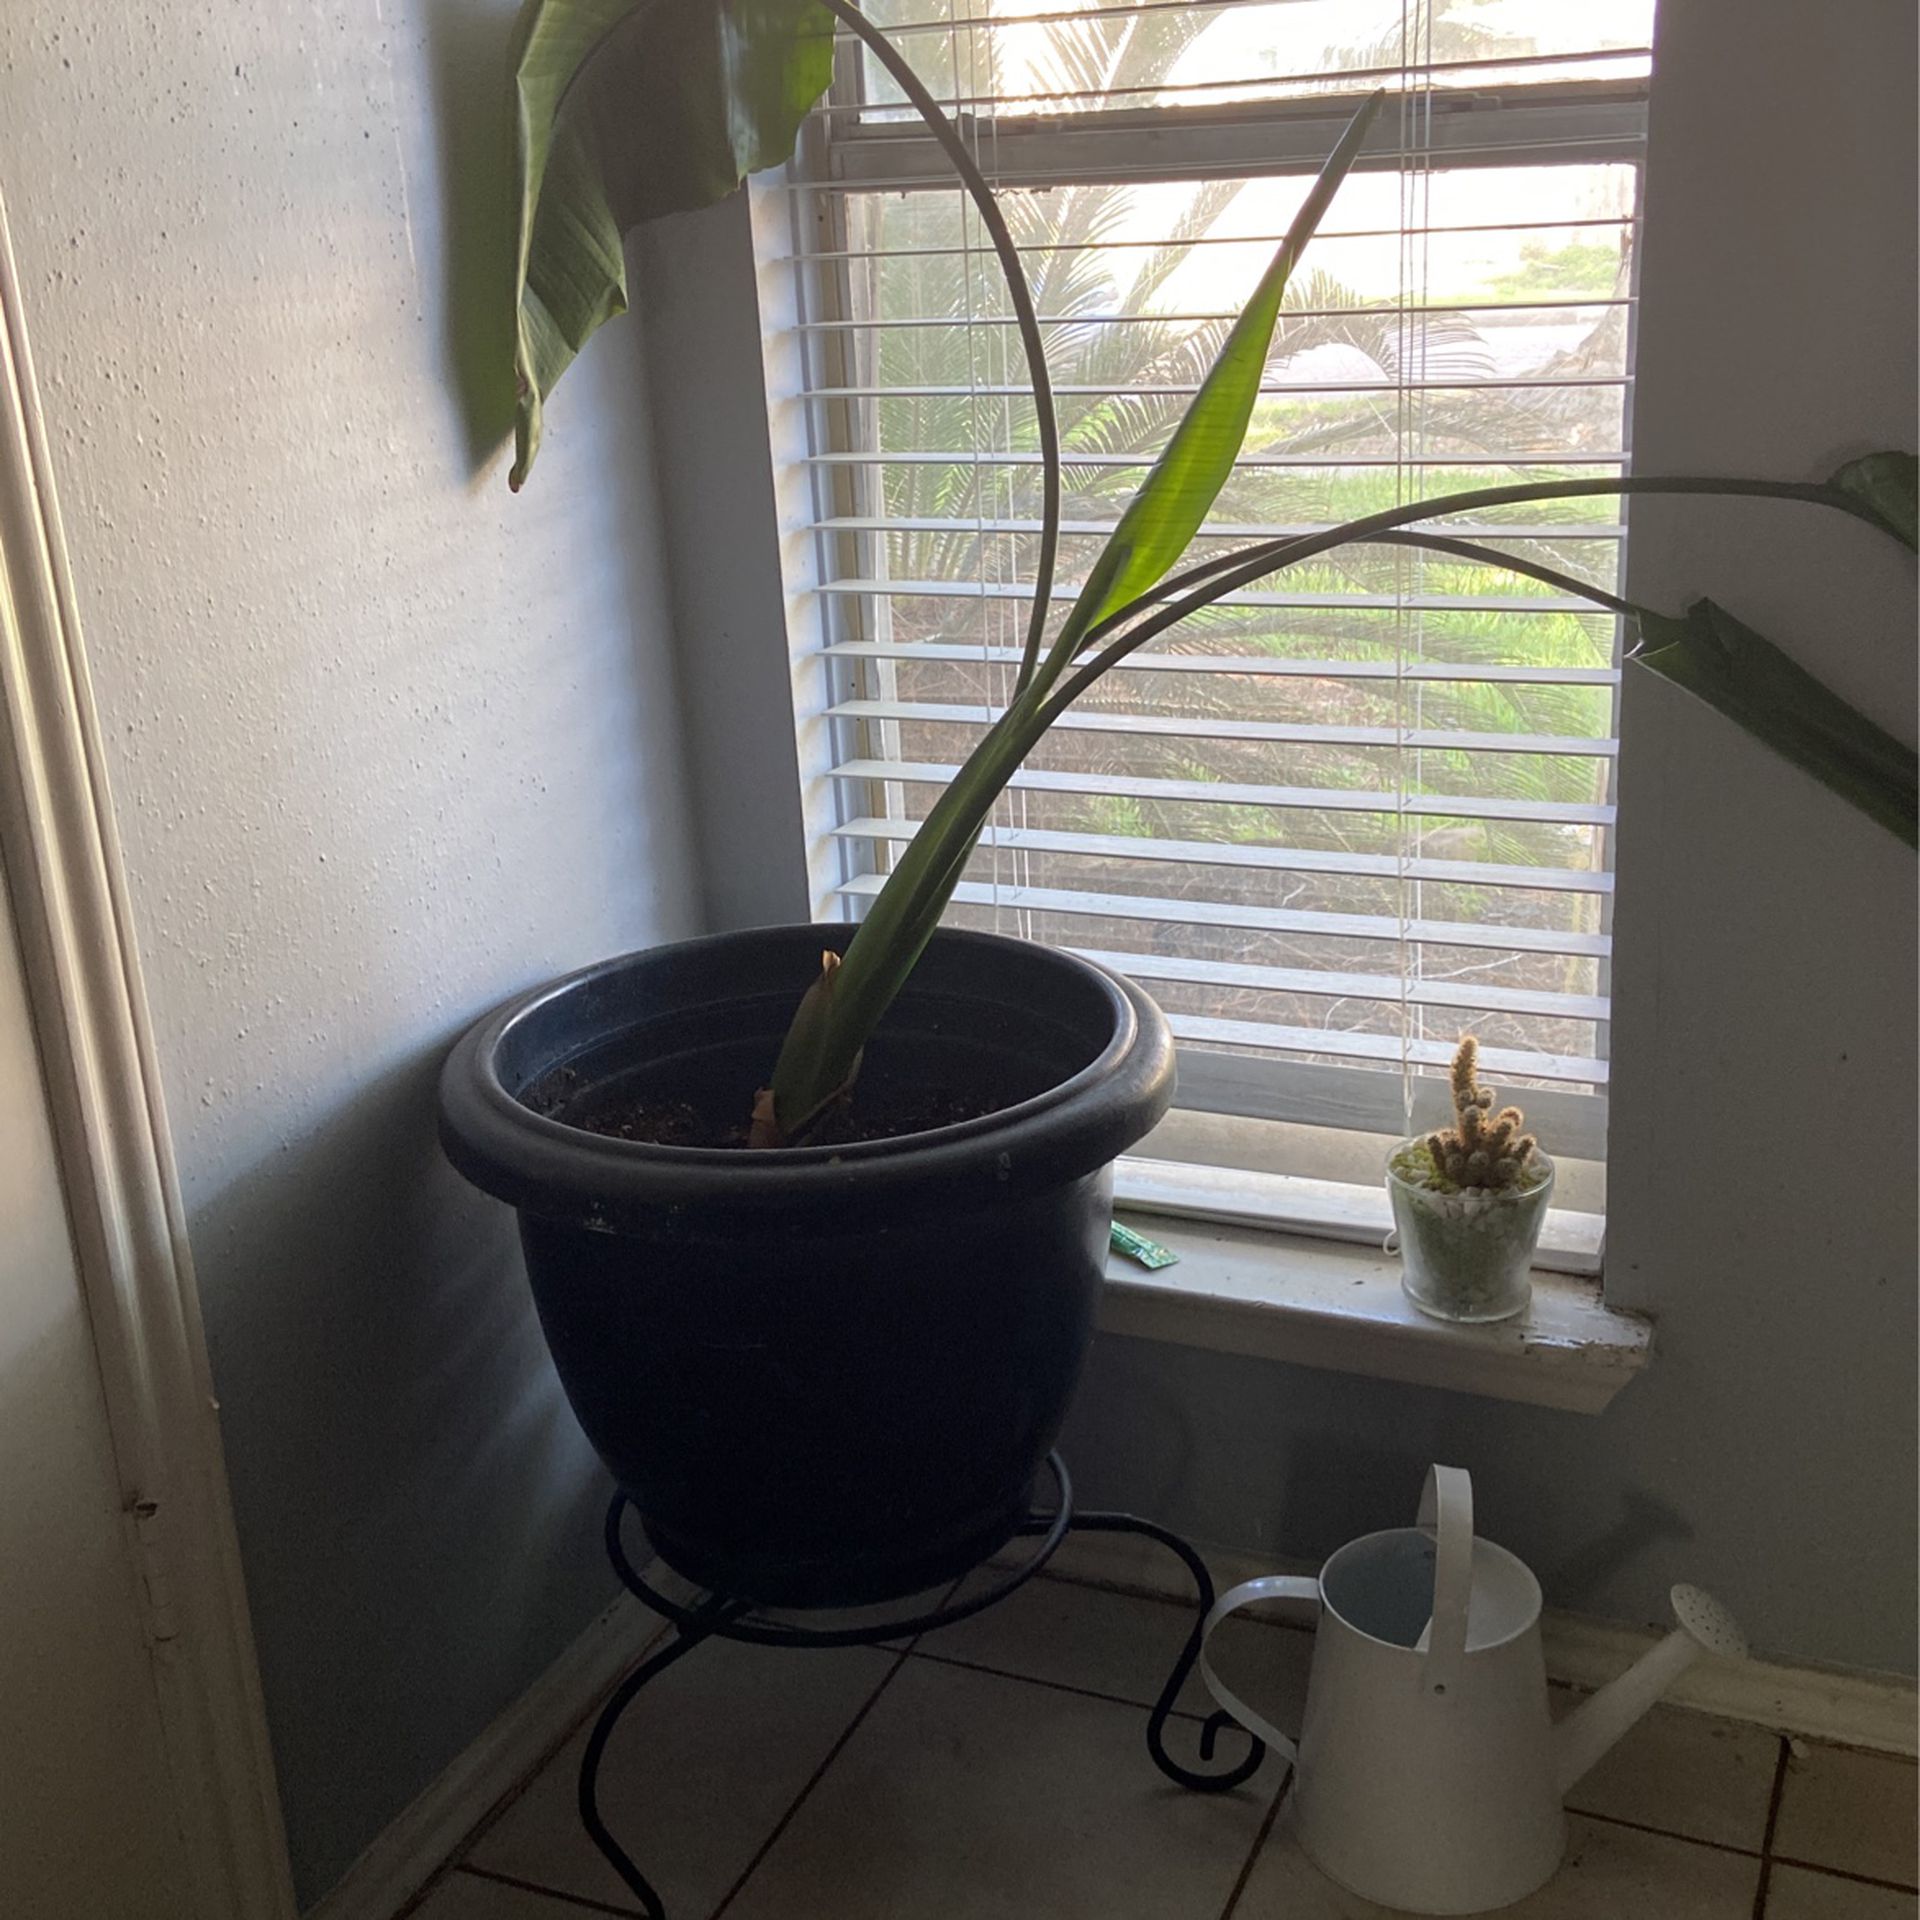 House Plants- Real Plants Need Water 